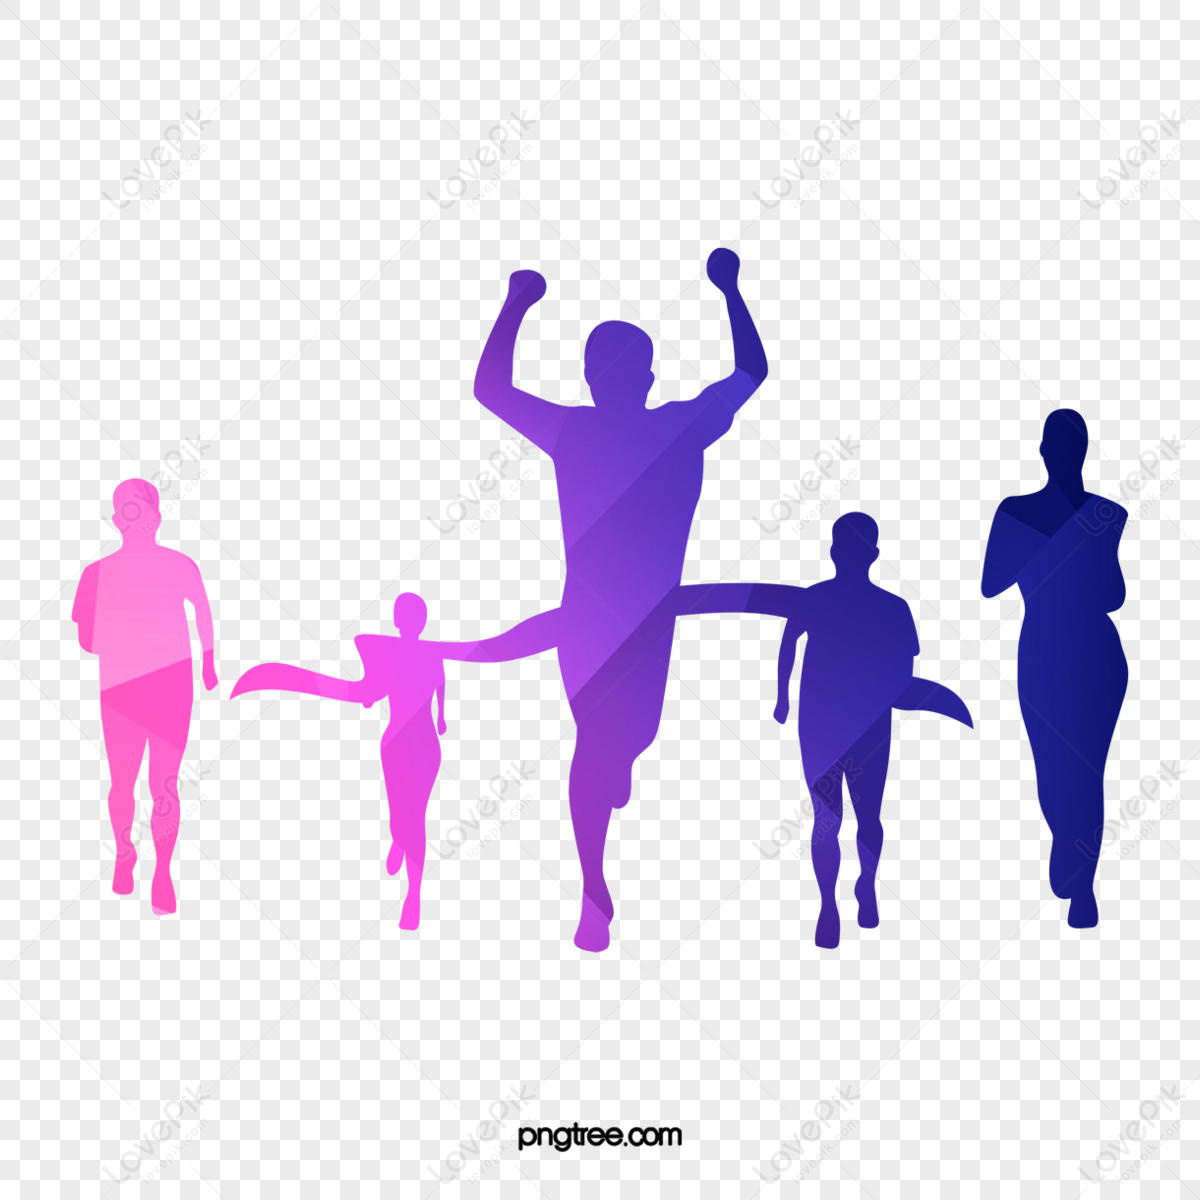 people crossing the finish line,line of people,characters,dream png transparent image